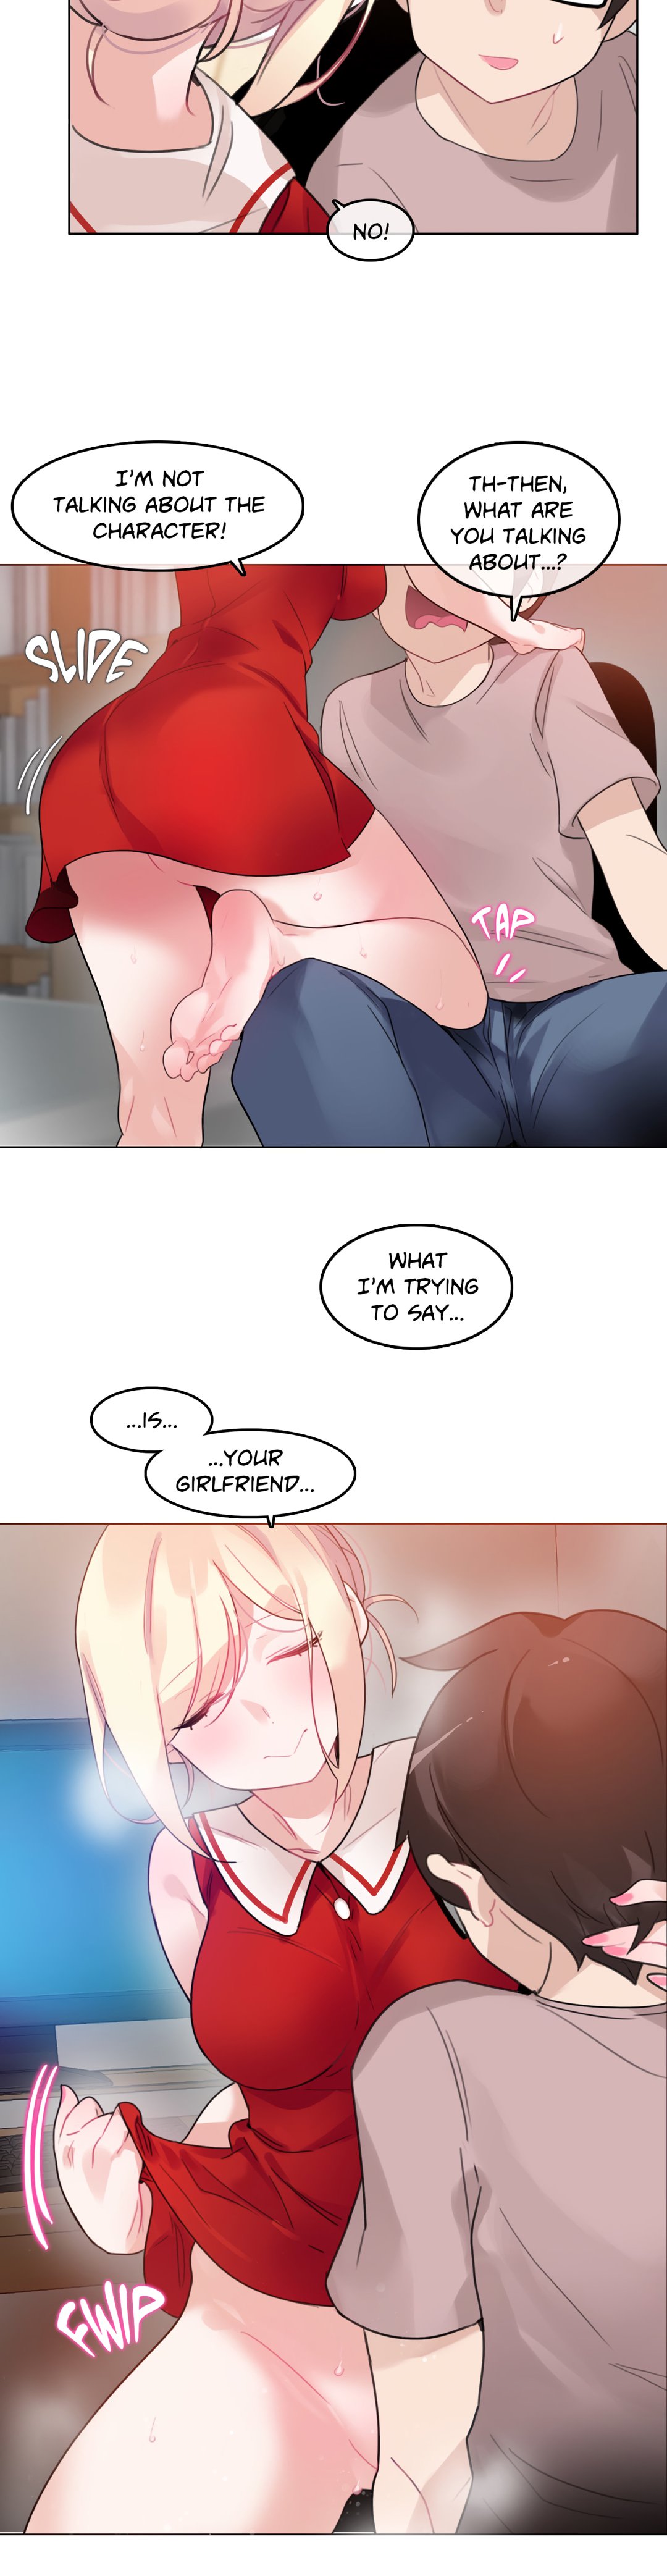 A Pervert's Daily Life - 37 page 16